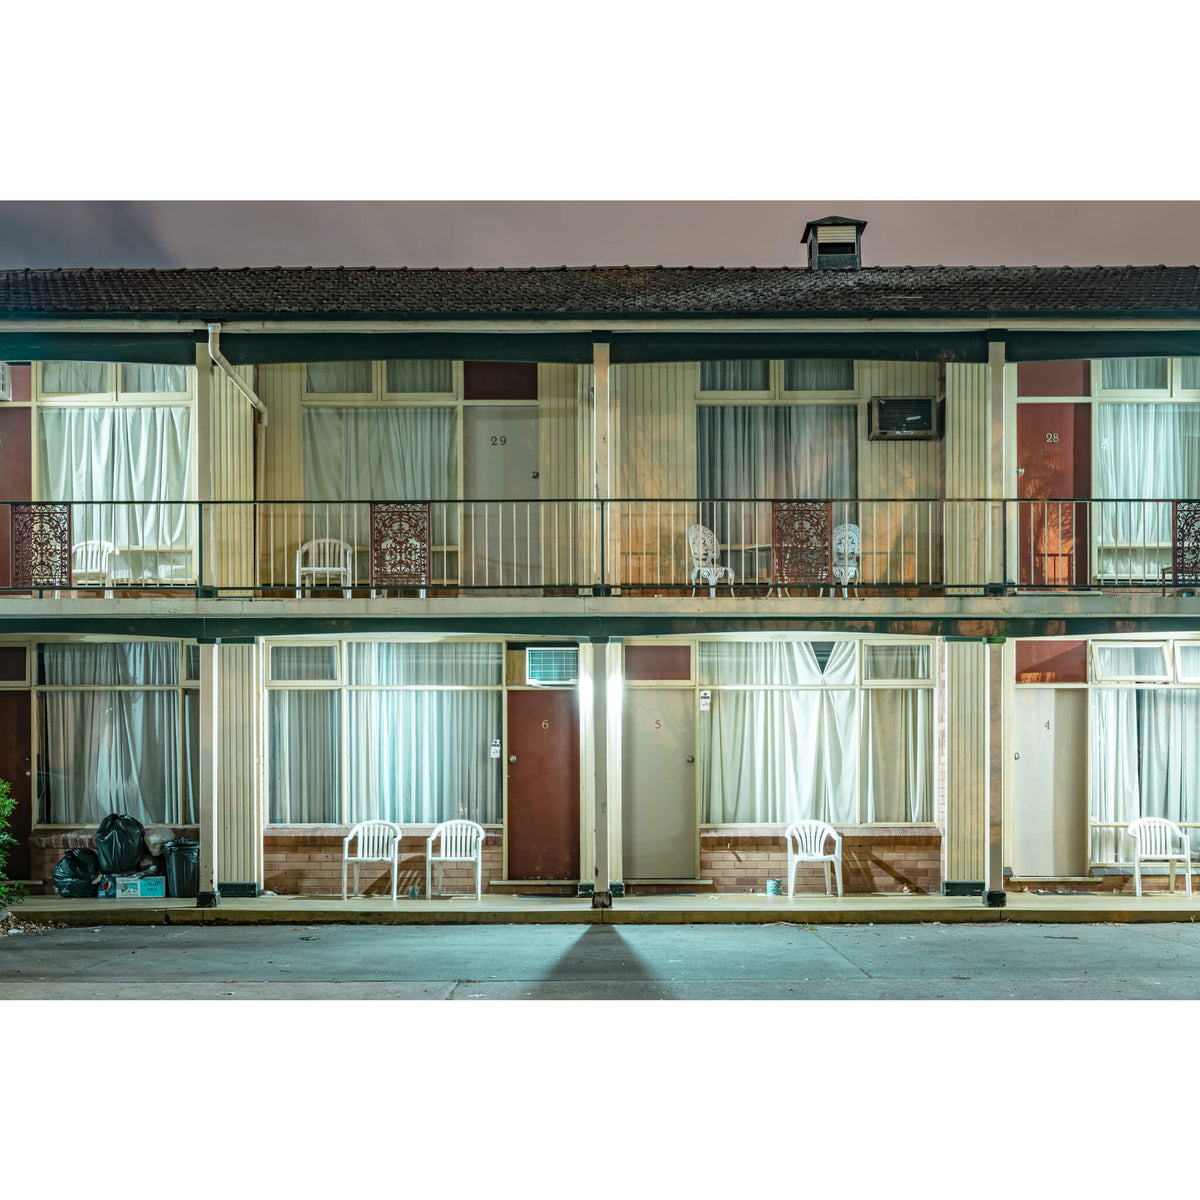 The Fontainebleau Motor Inn, Liverpool | Hotel Motel 101 Fine Art Print - Lost Collective Shop